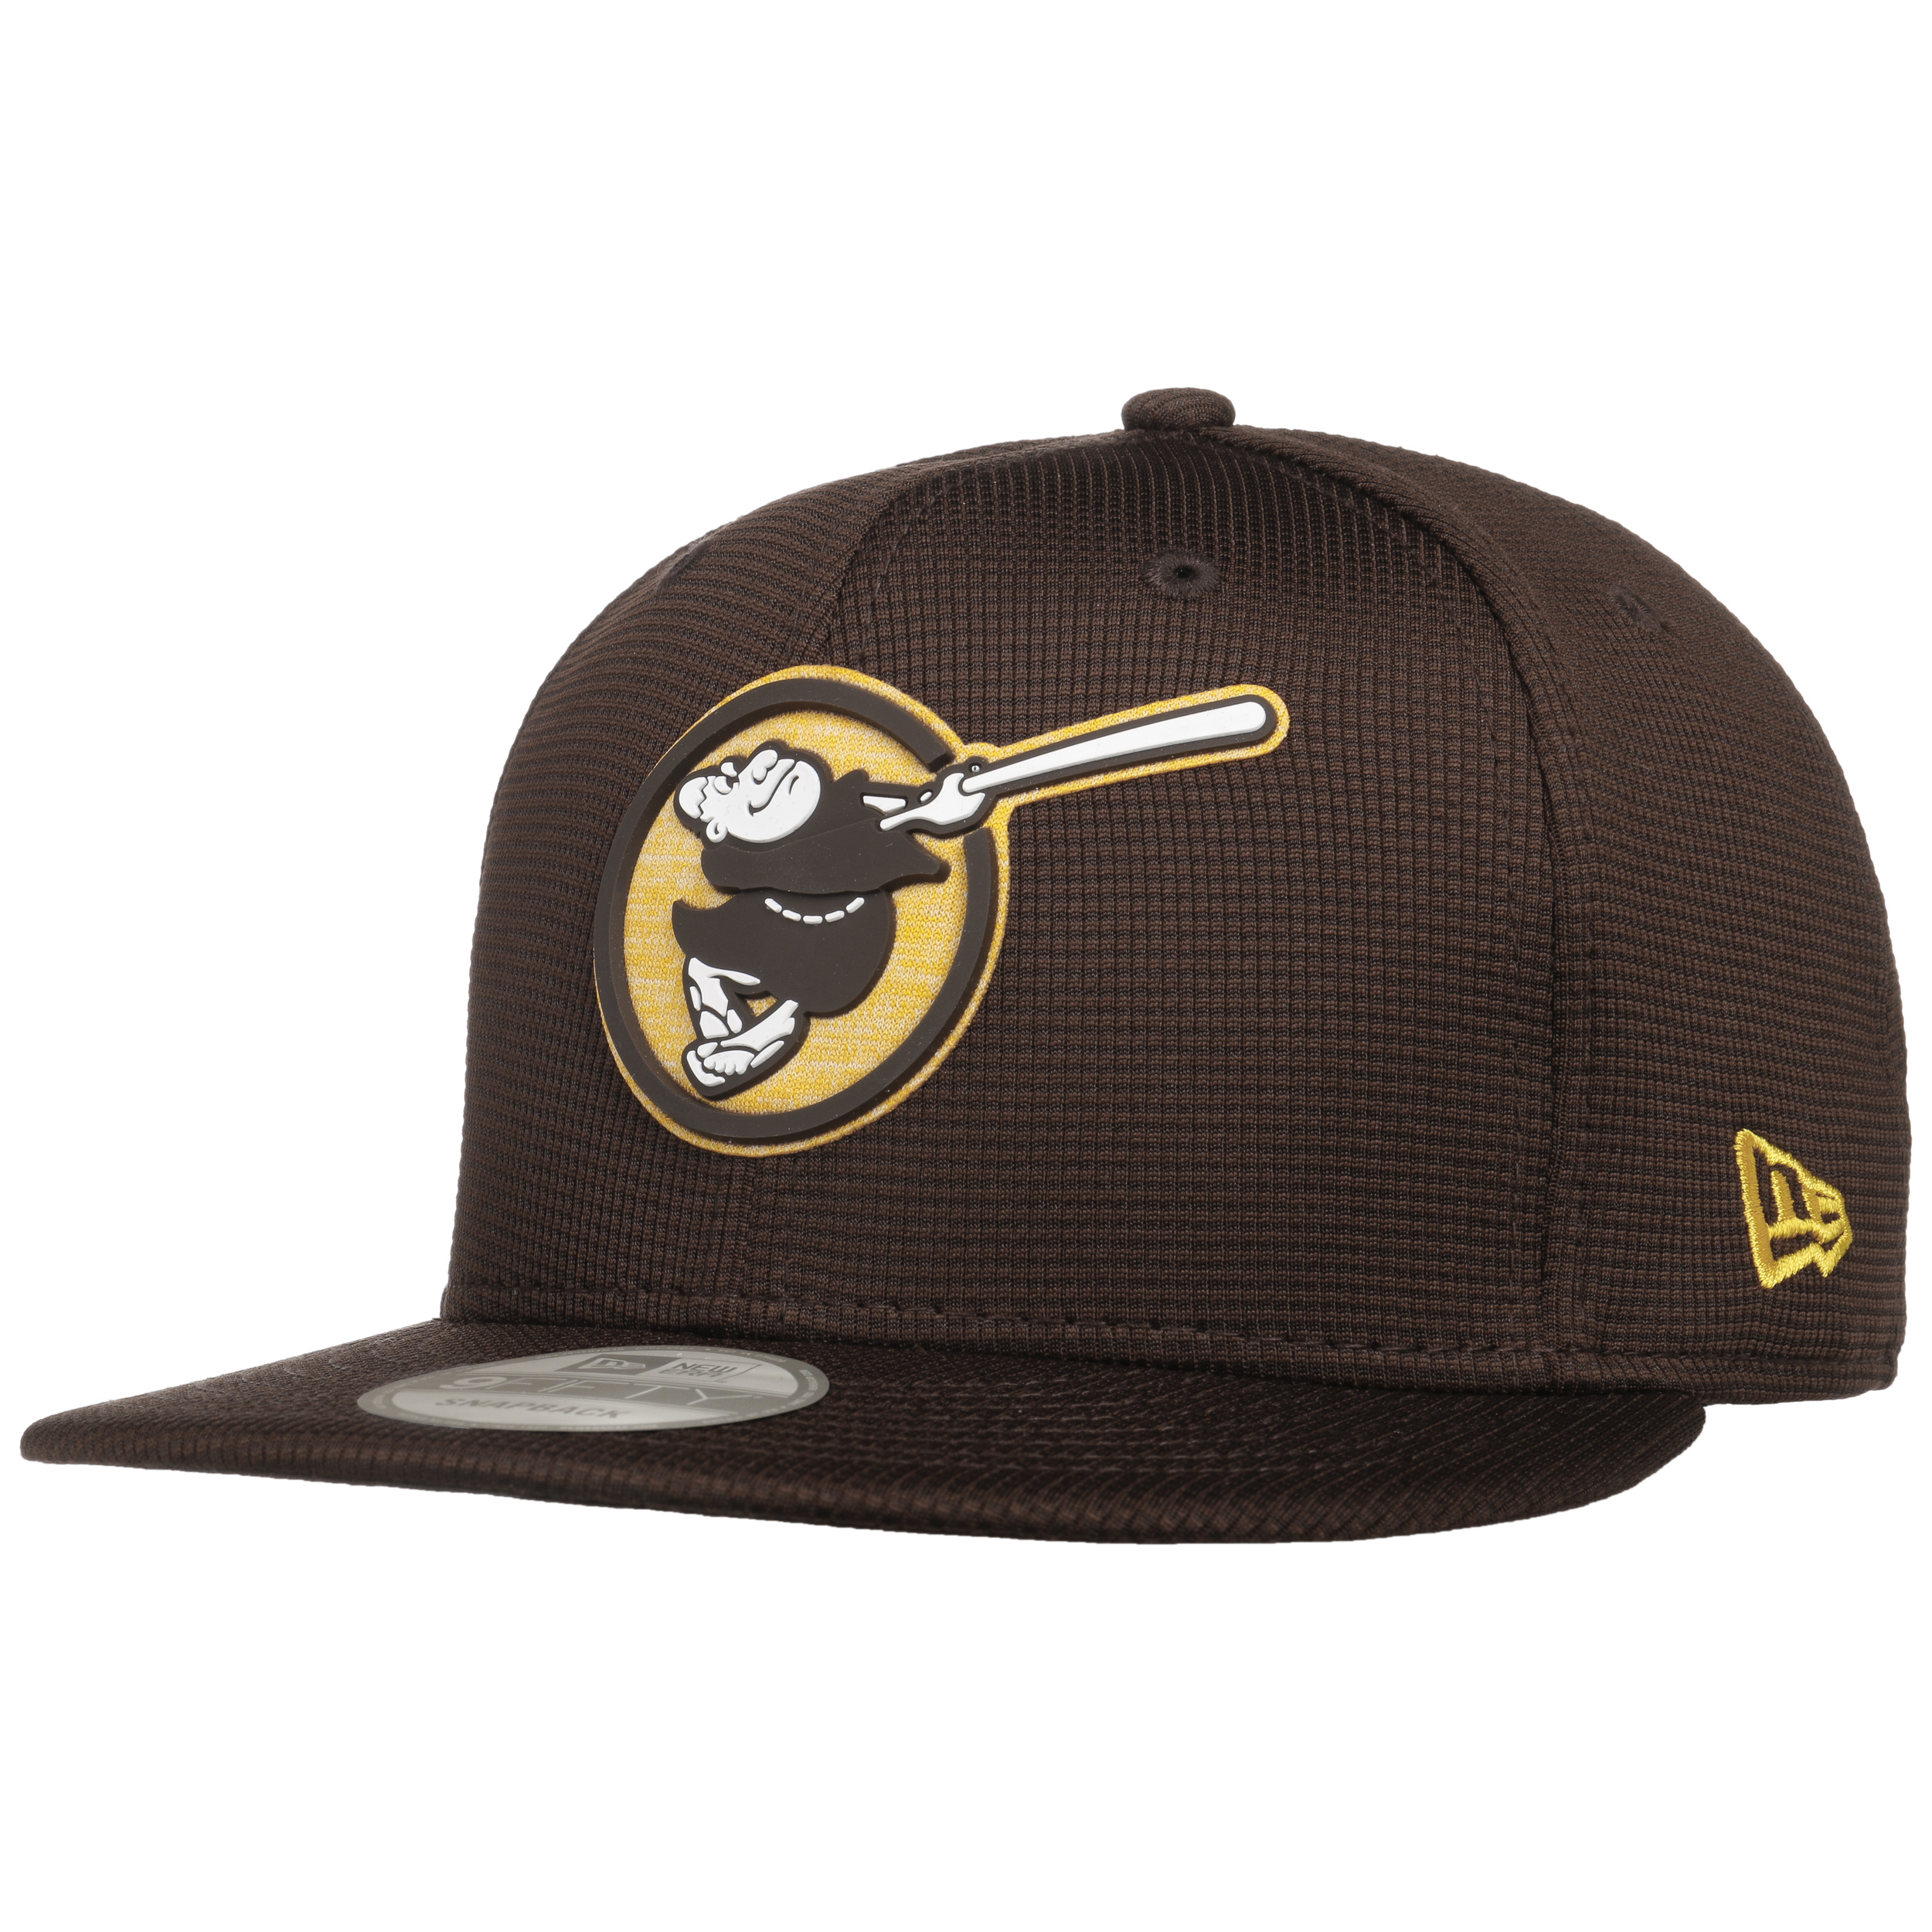 Official San Diego Padres Baseball Hats, Padres Caps, Padres Hat